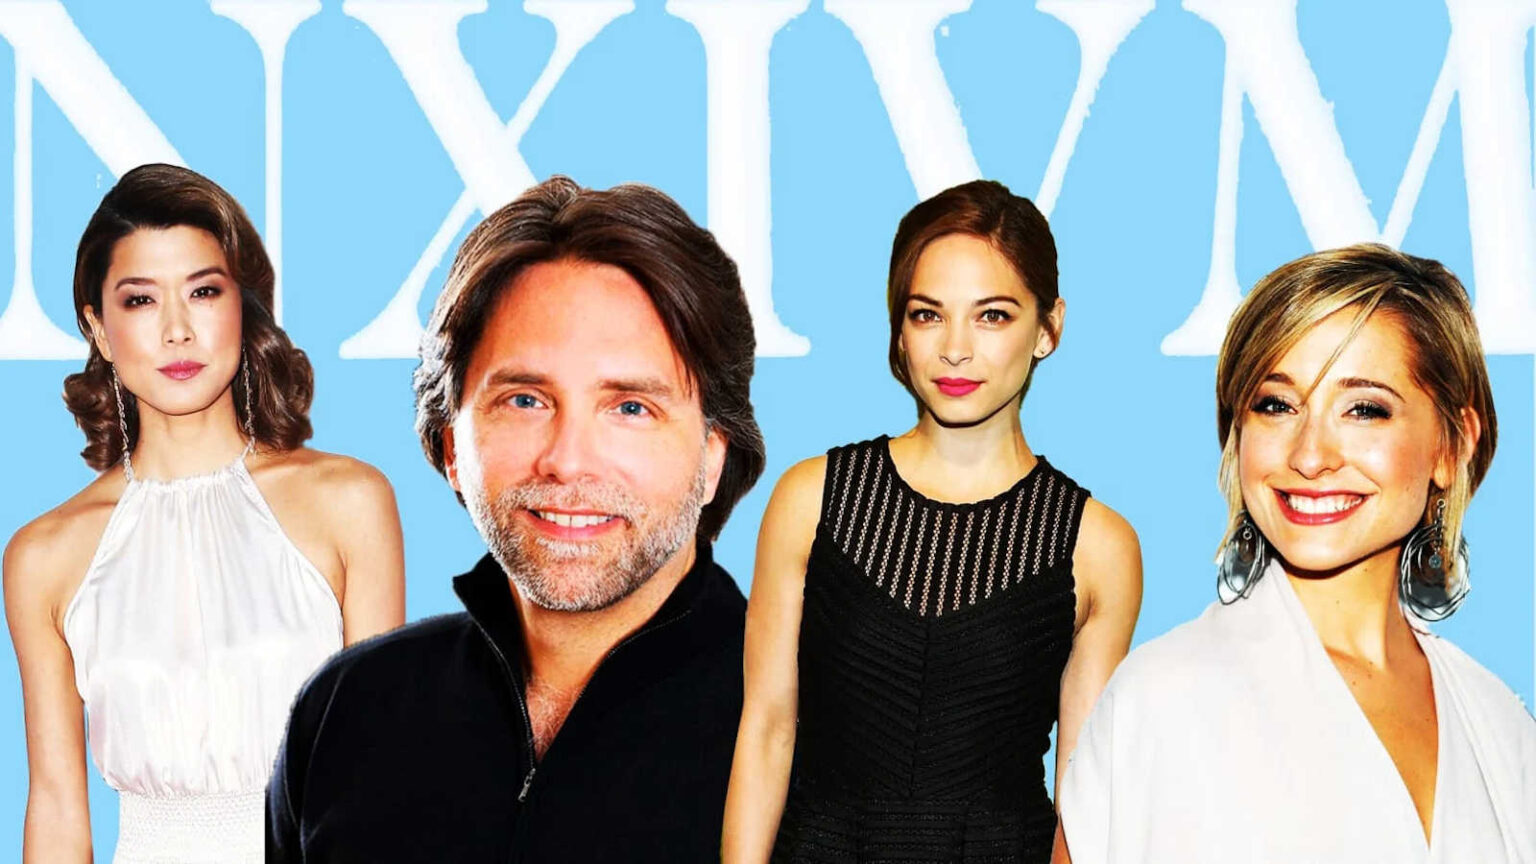 Just last year Keith Raniere, the leader of the “self-help” programme NXIVM, was convicted. Here's what we know about the strange case.